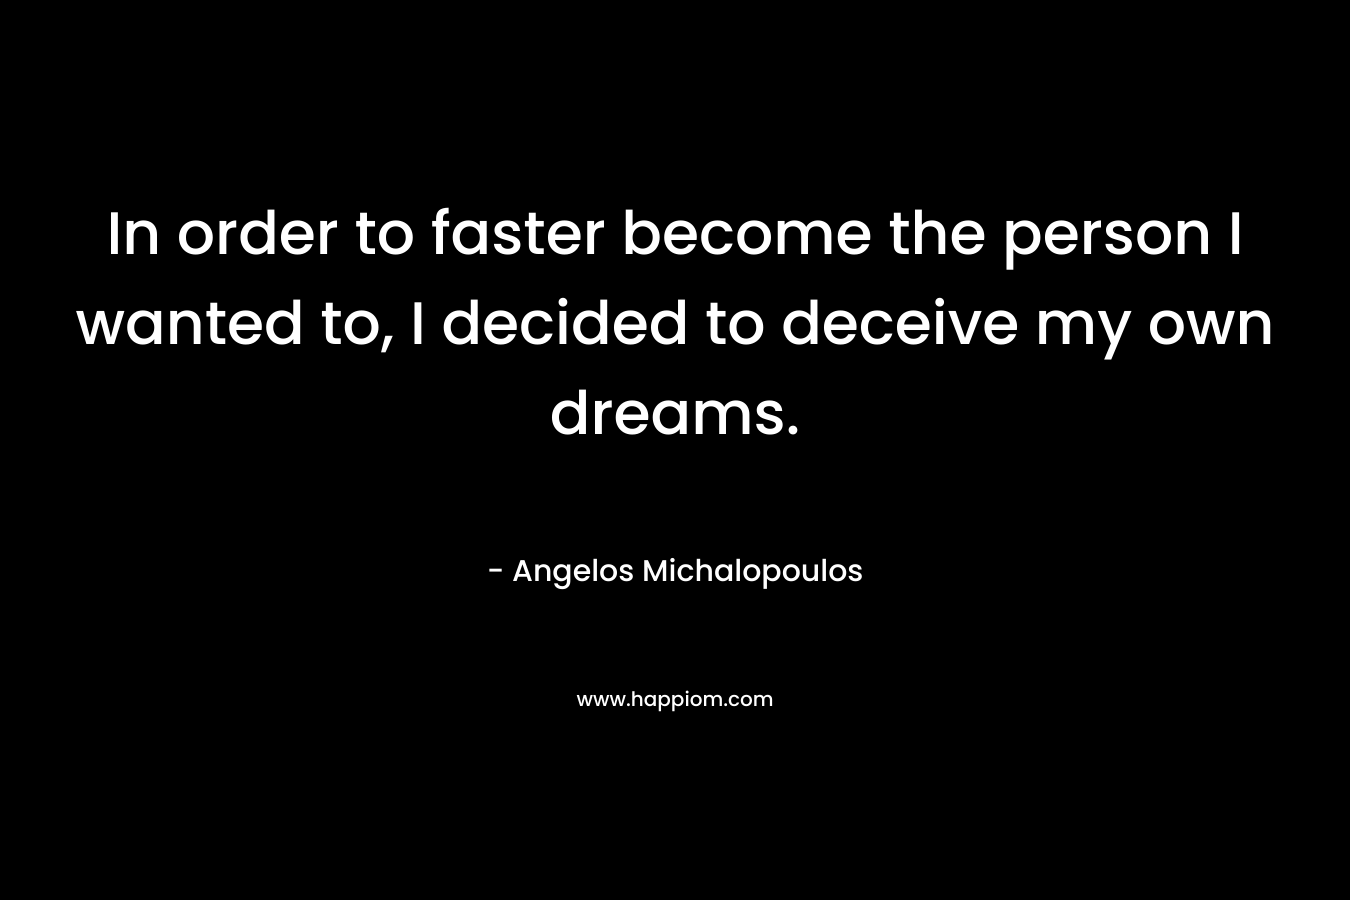 In order to faster become the person I wanted to, I decided to deceive my own dreams. – Angelos Michalopoulos